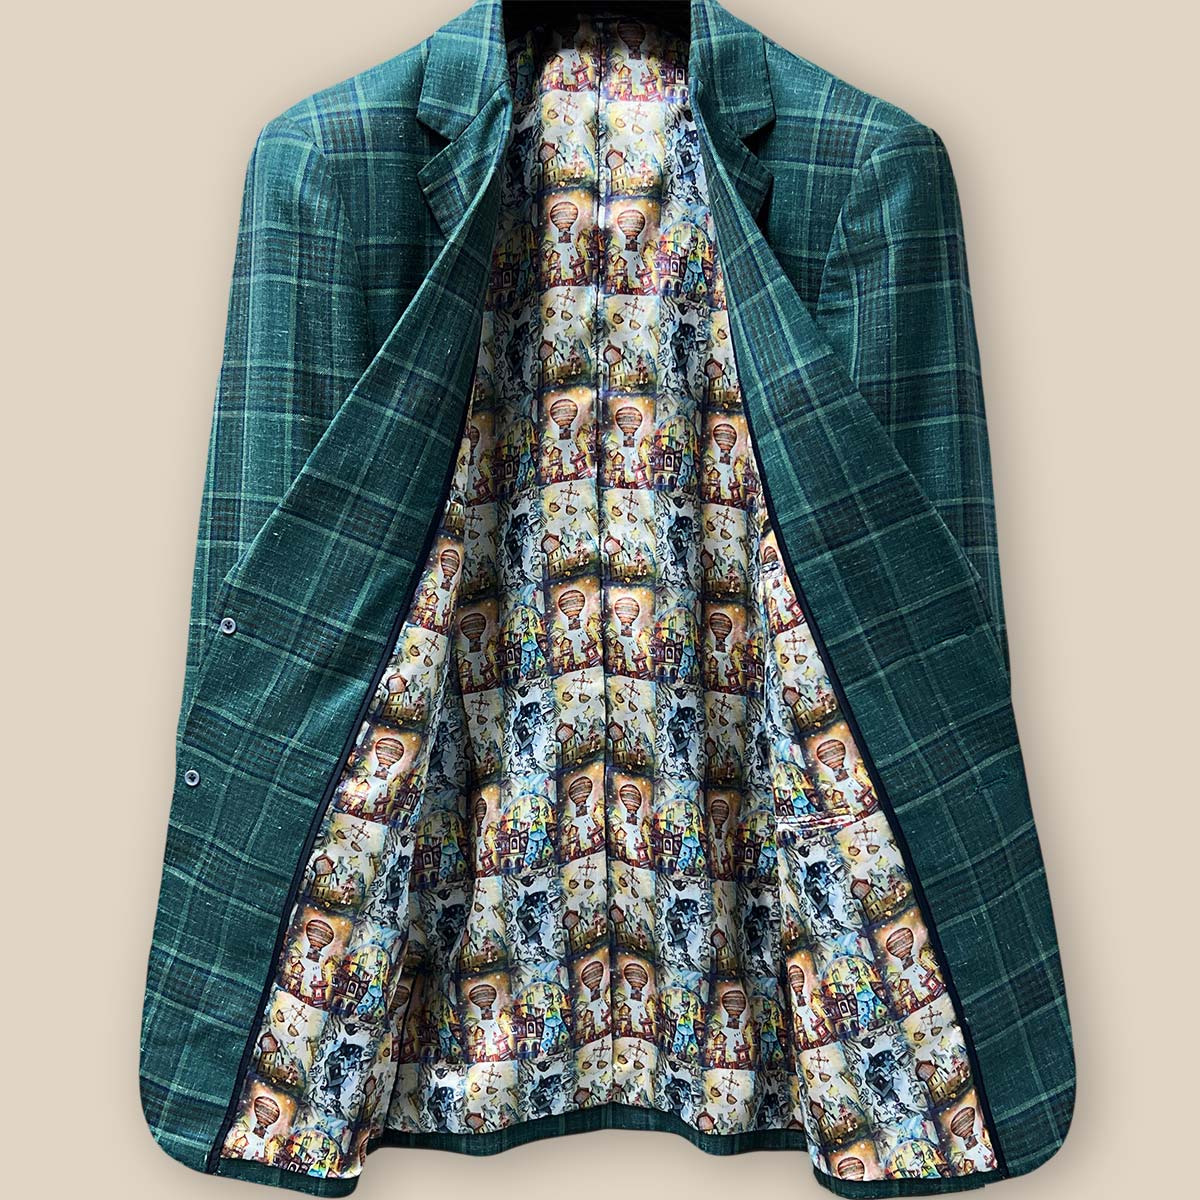 Full view of the whimsical Wizard of Oz flash lining inside the Westwood Hart hunter green with navy and chocolate brown plaid mens sport coat.